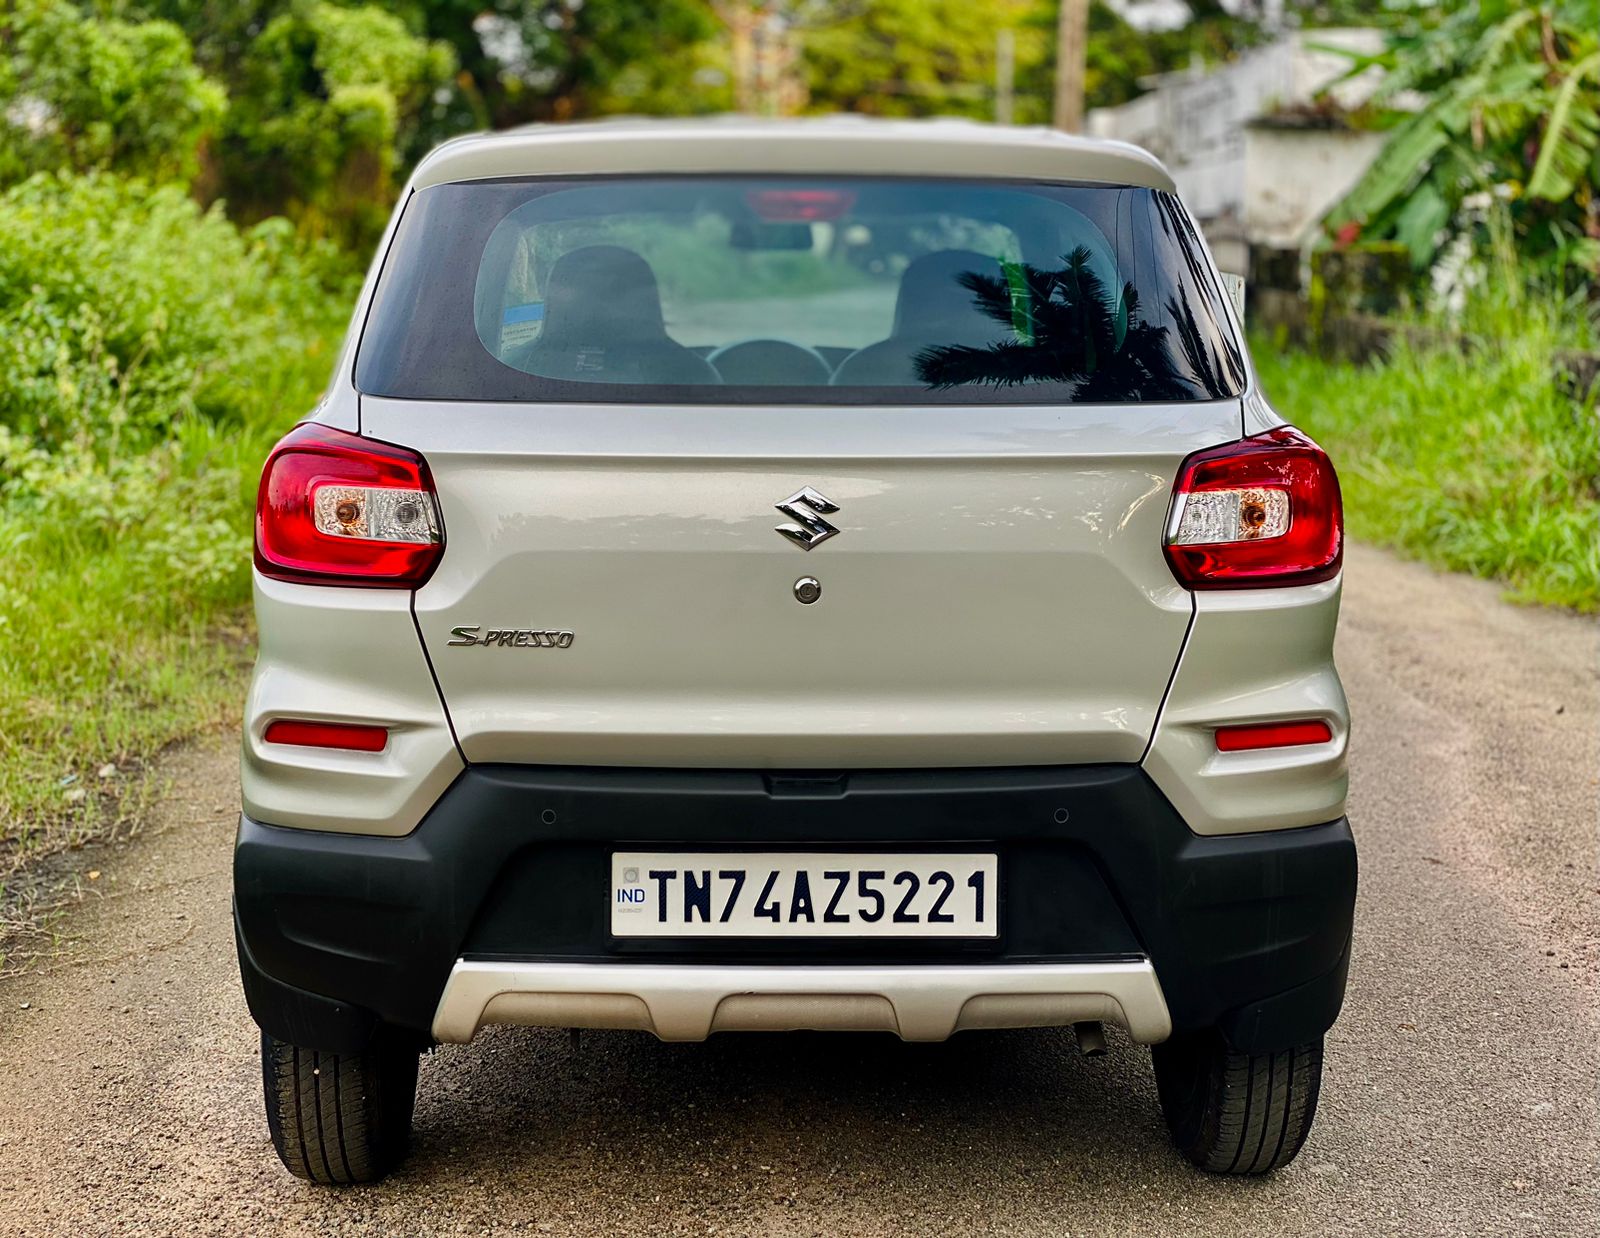 5067-for-sale-Maruthi-Suzuki-S-Presso-Petrol-First-Owner-2021-TN-registered-rs-490000